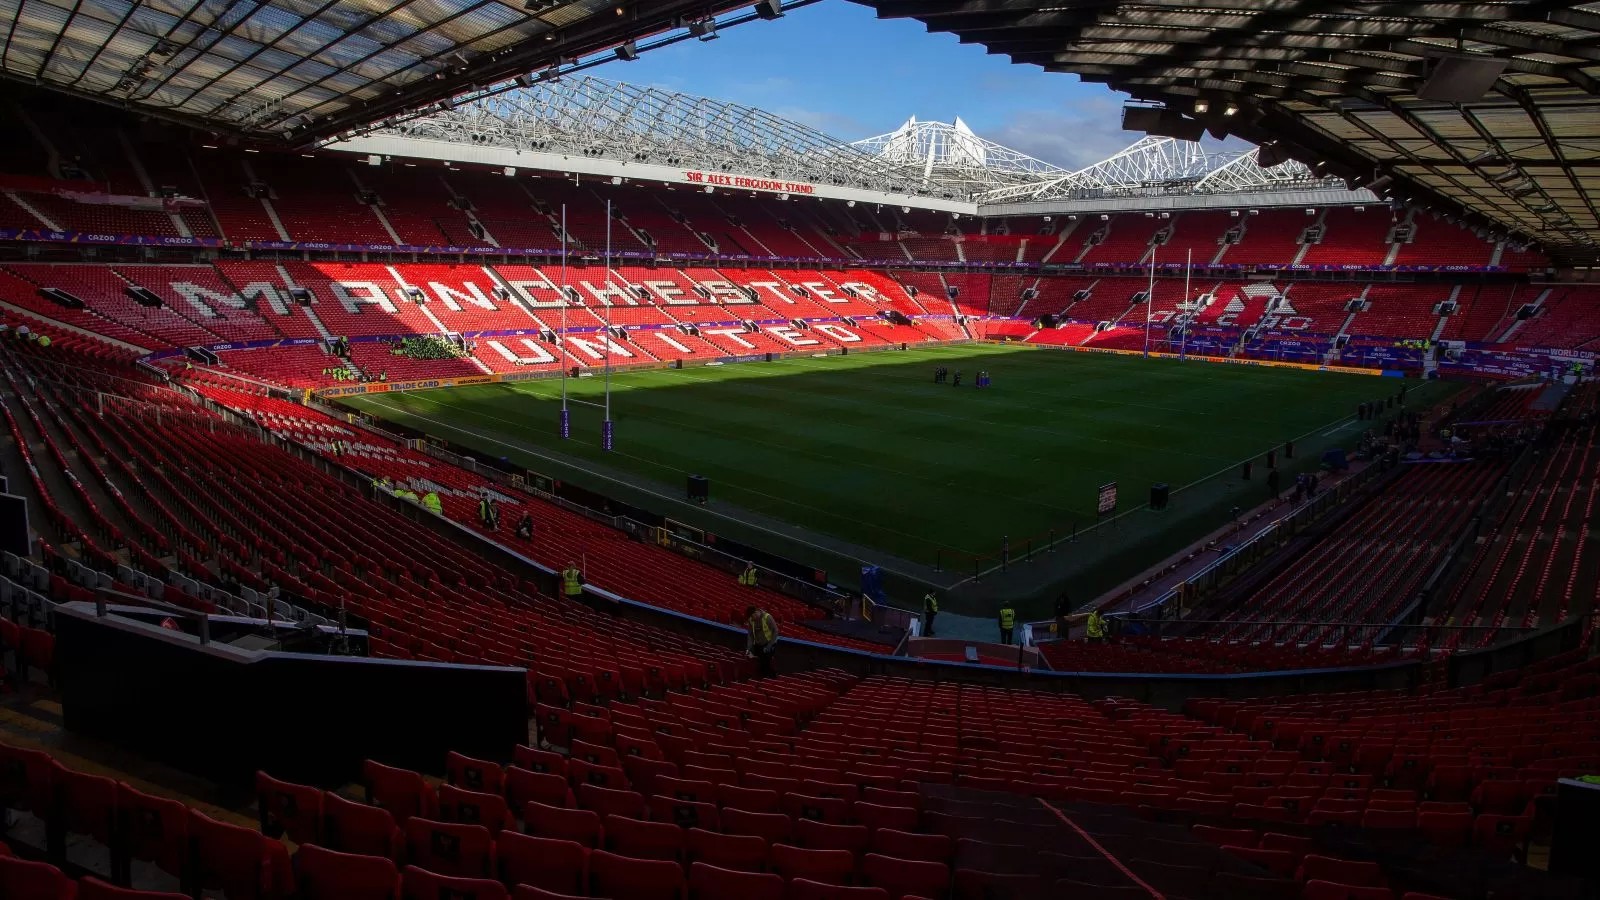 Saudi Arabia confirms ‘interest’ in Man Utd and ‘support’ for private sector bids